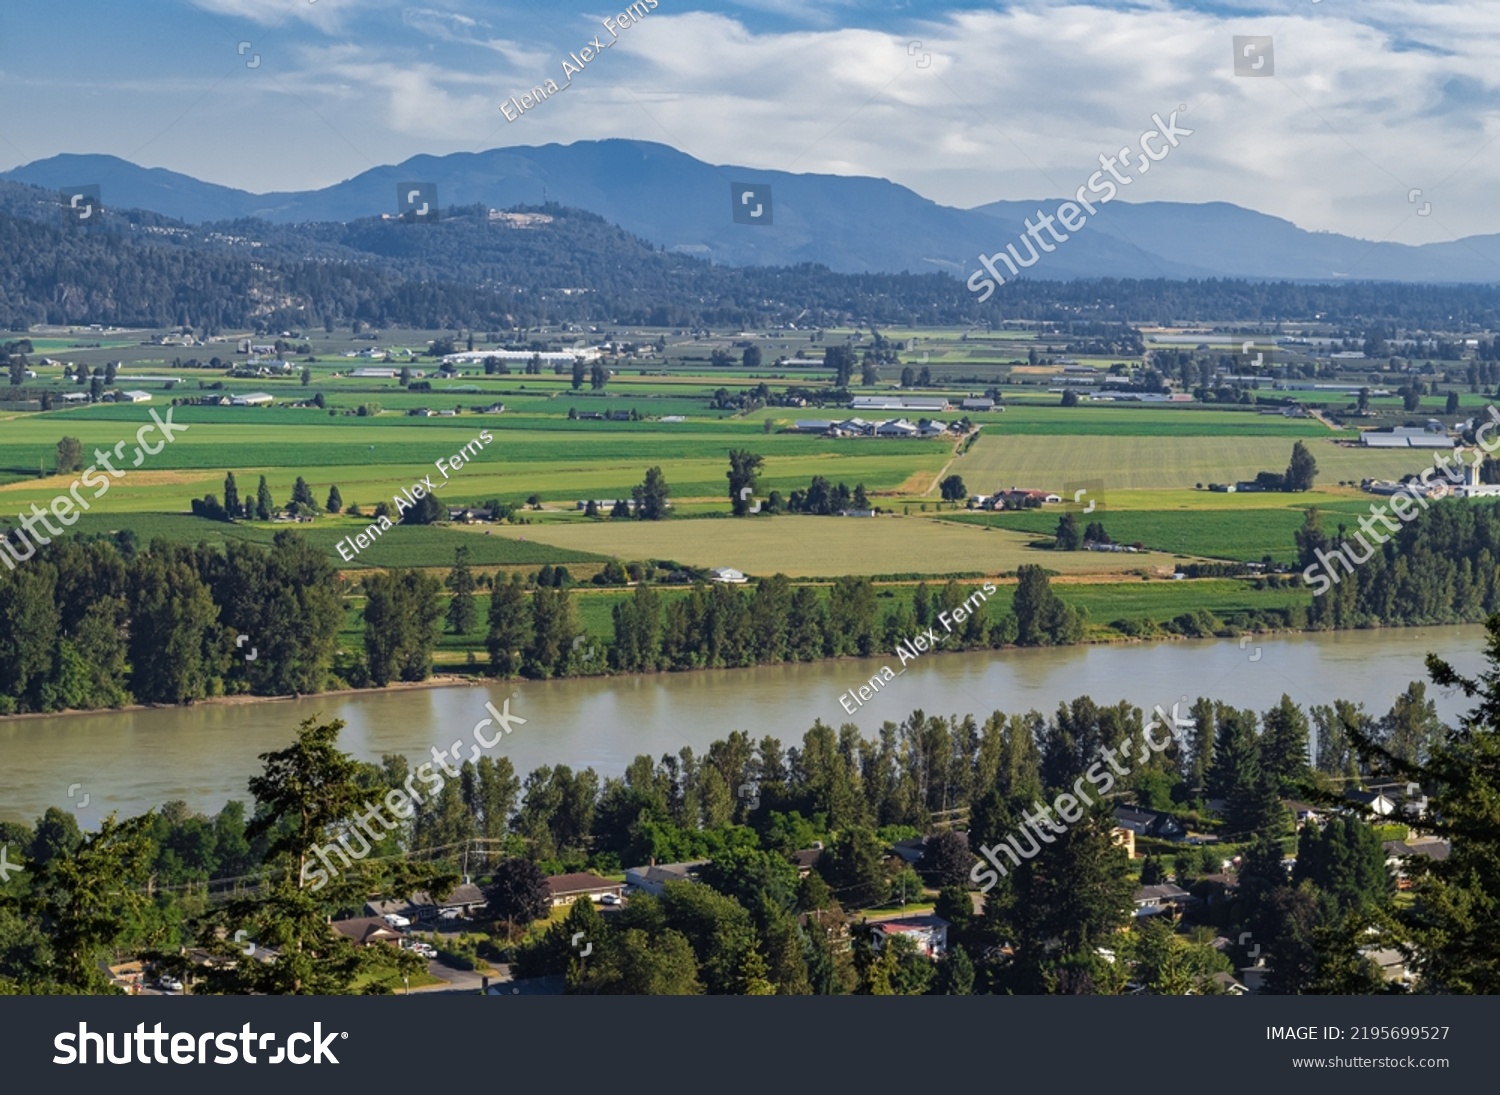 View of the Fraser Valley near Abbotsford BC. Summer in the Fraser Valley. Canadian homestead. Rural agricultural land. The Frazier River is an important salmon habitat for the lower mainland of BC #2195699527